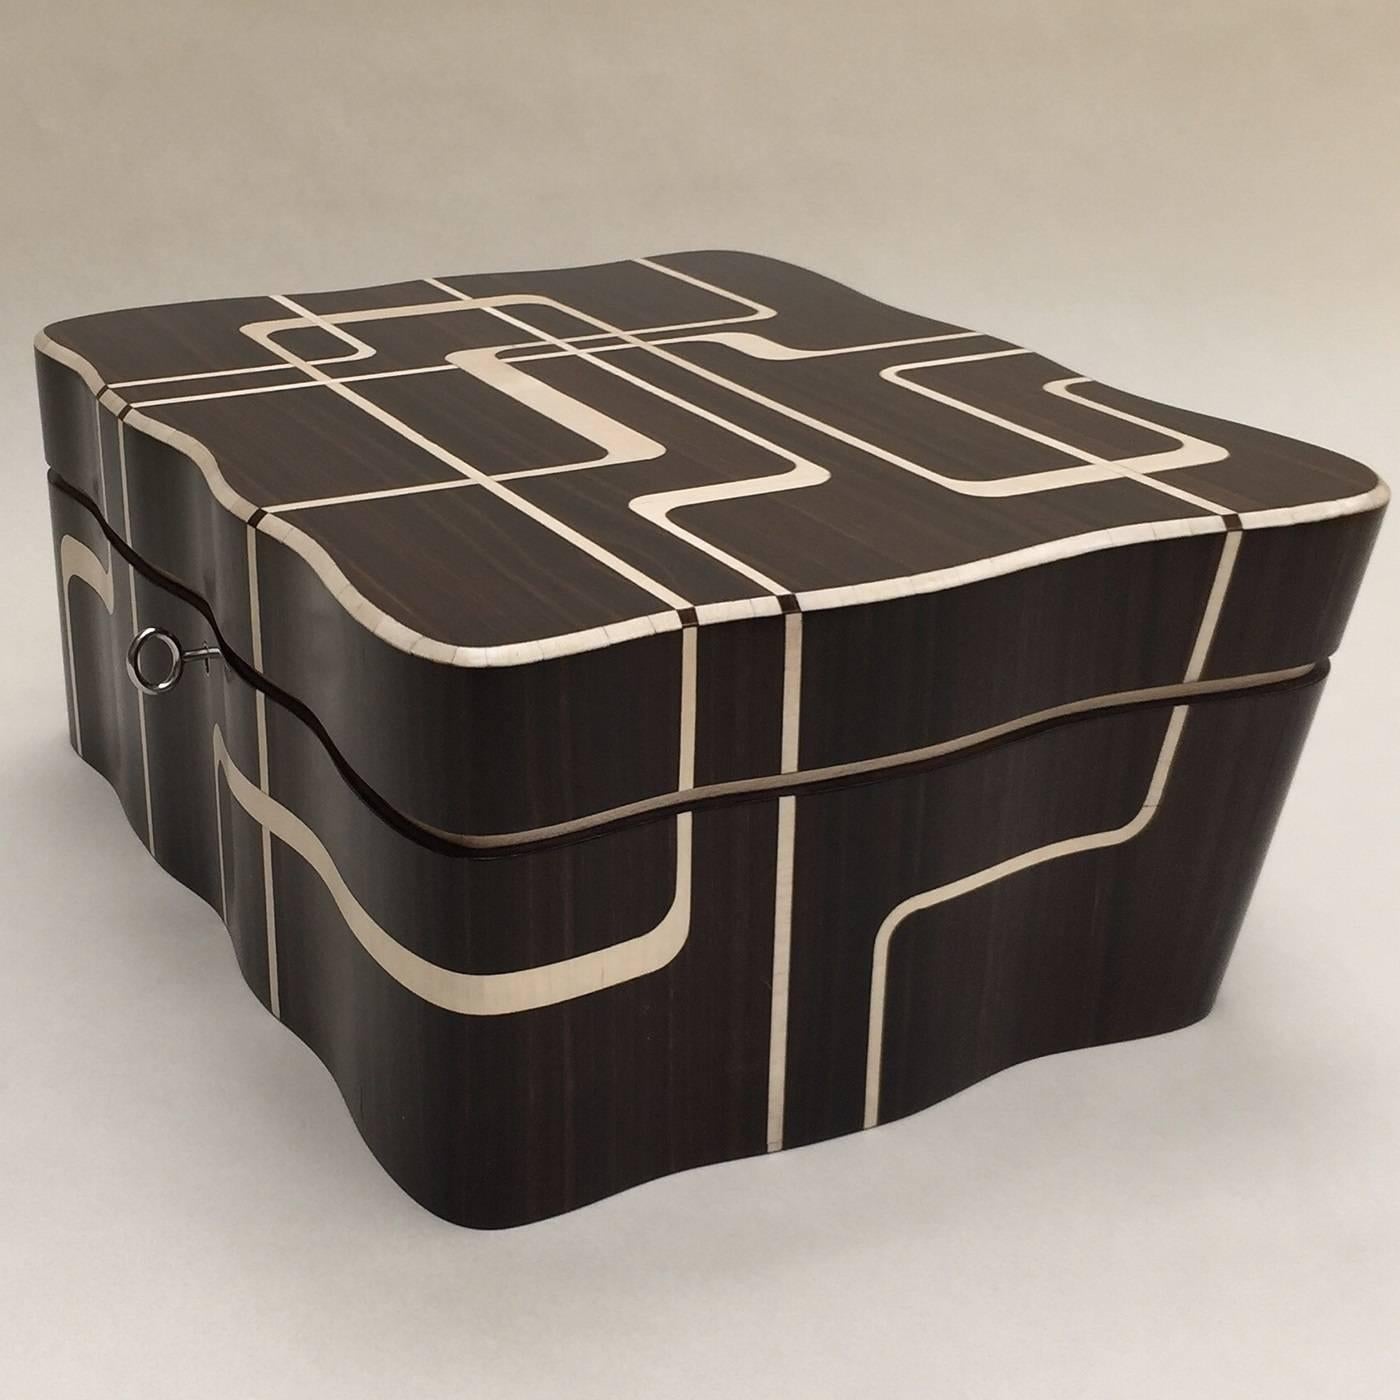 The brightness of the maple, the intensity of the ebony. The dark of the night and the light of the day reveal in the harmonious balance of the coloured inlays of these jewellery boxes. A delicate twine of lines creating a visual chiaroscuro effect,